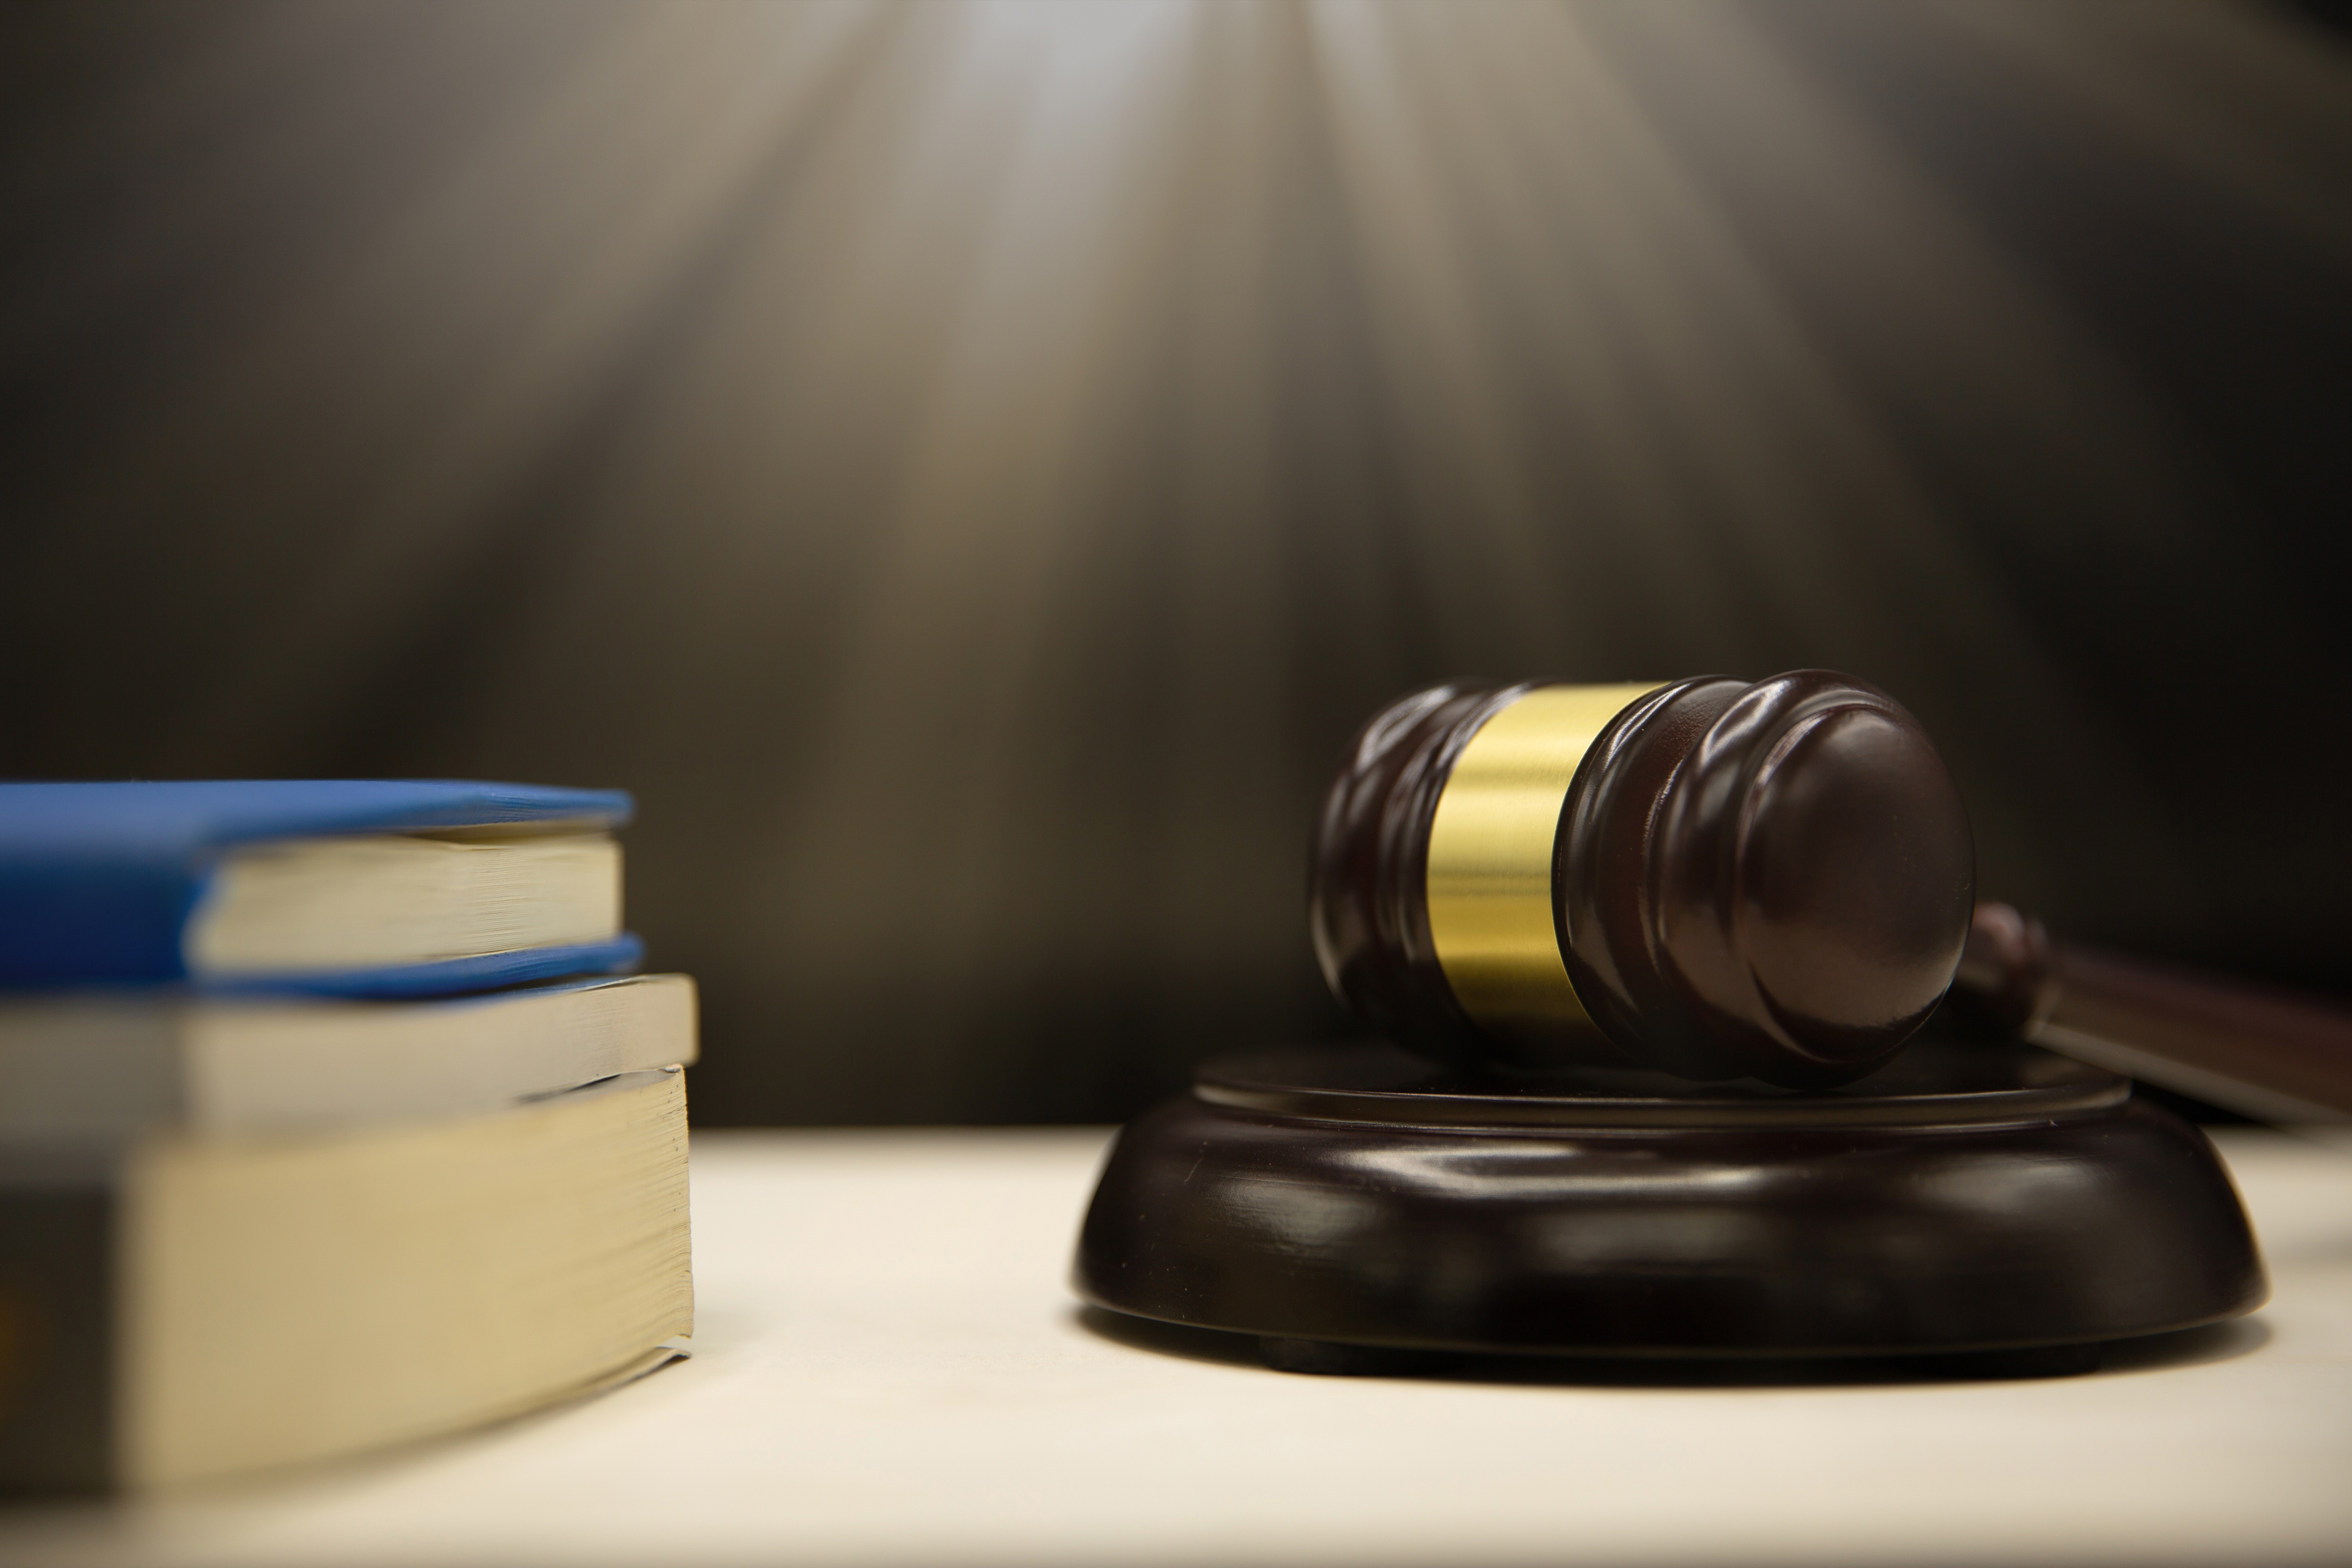 judges-gavel-book-wooden-table-law-justice-concept-background (1)